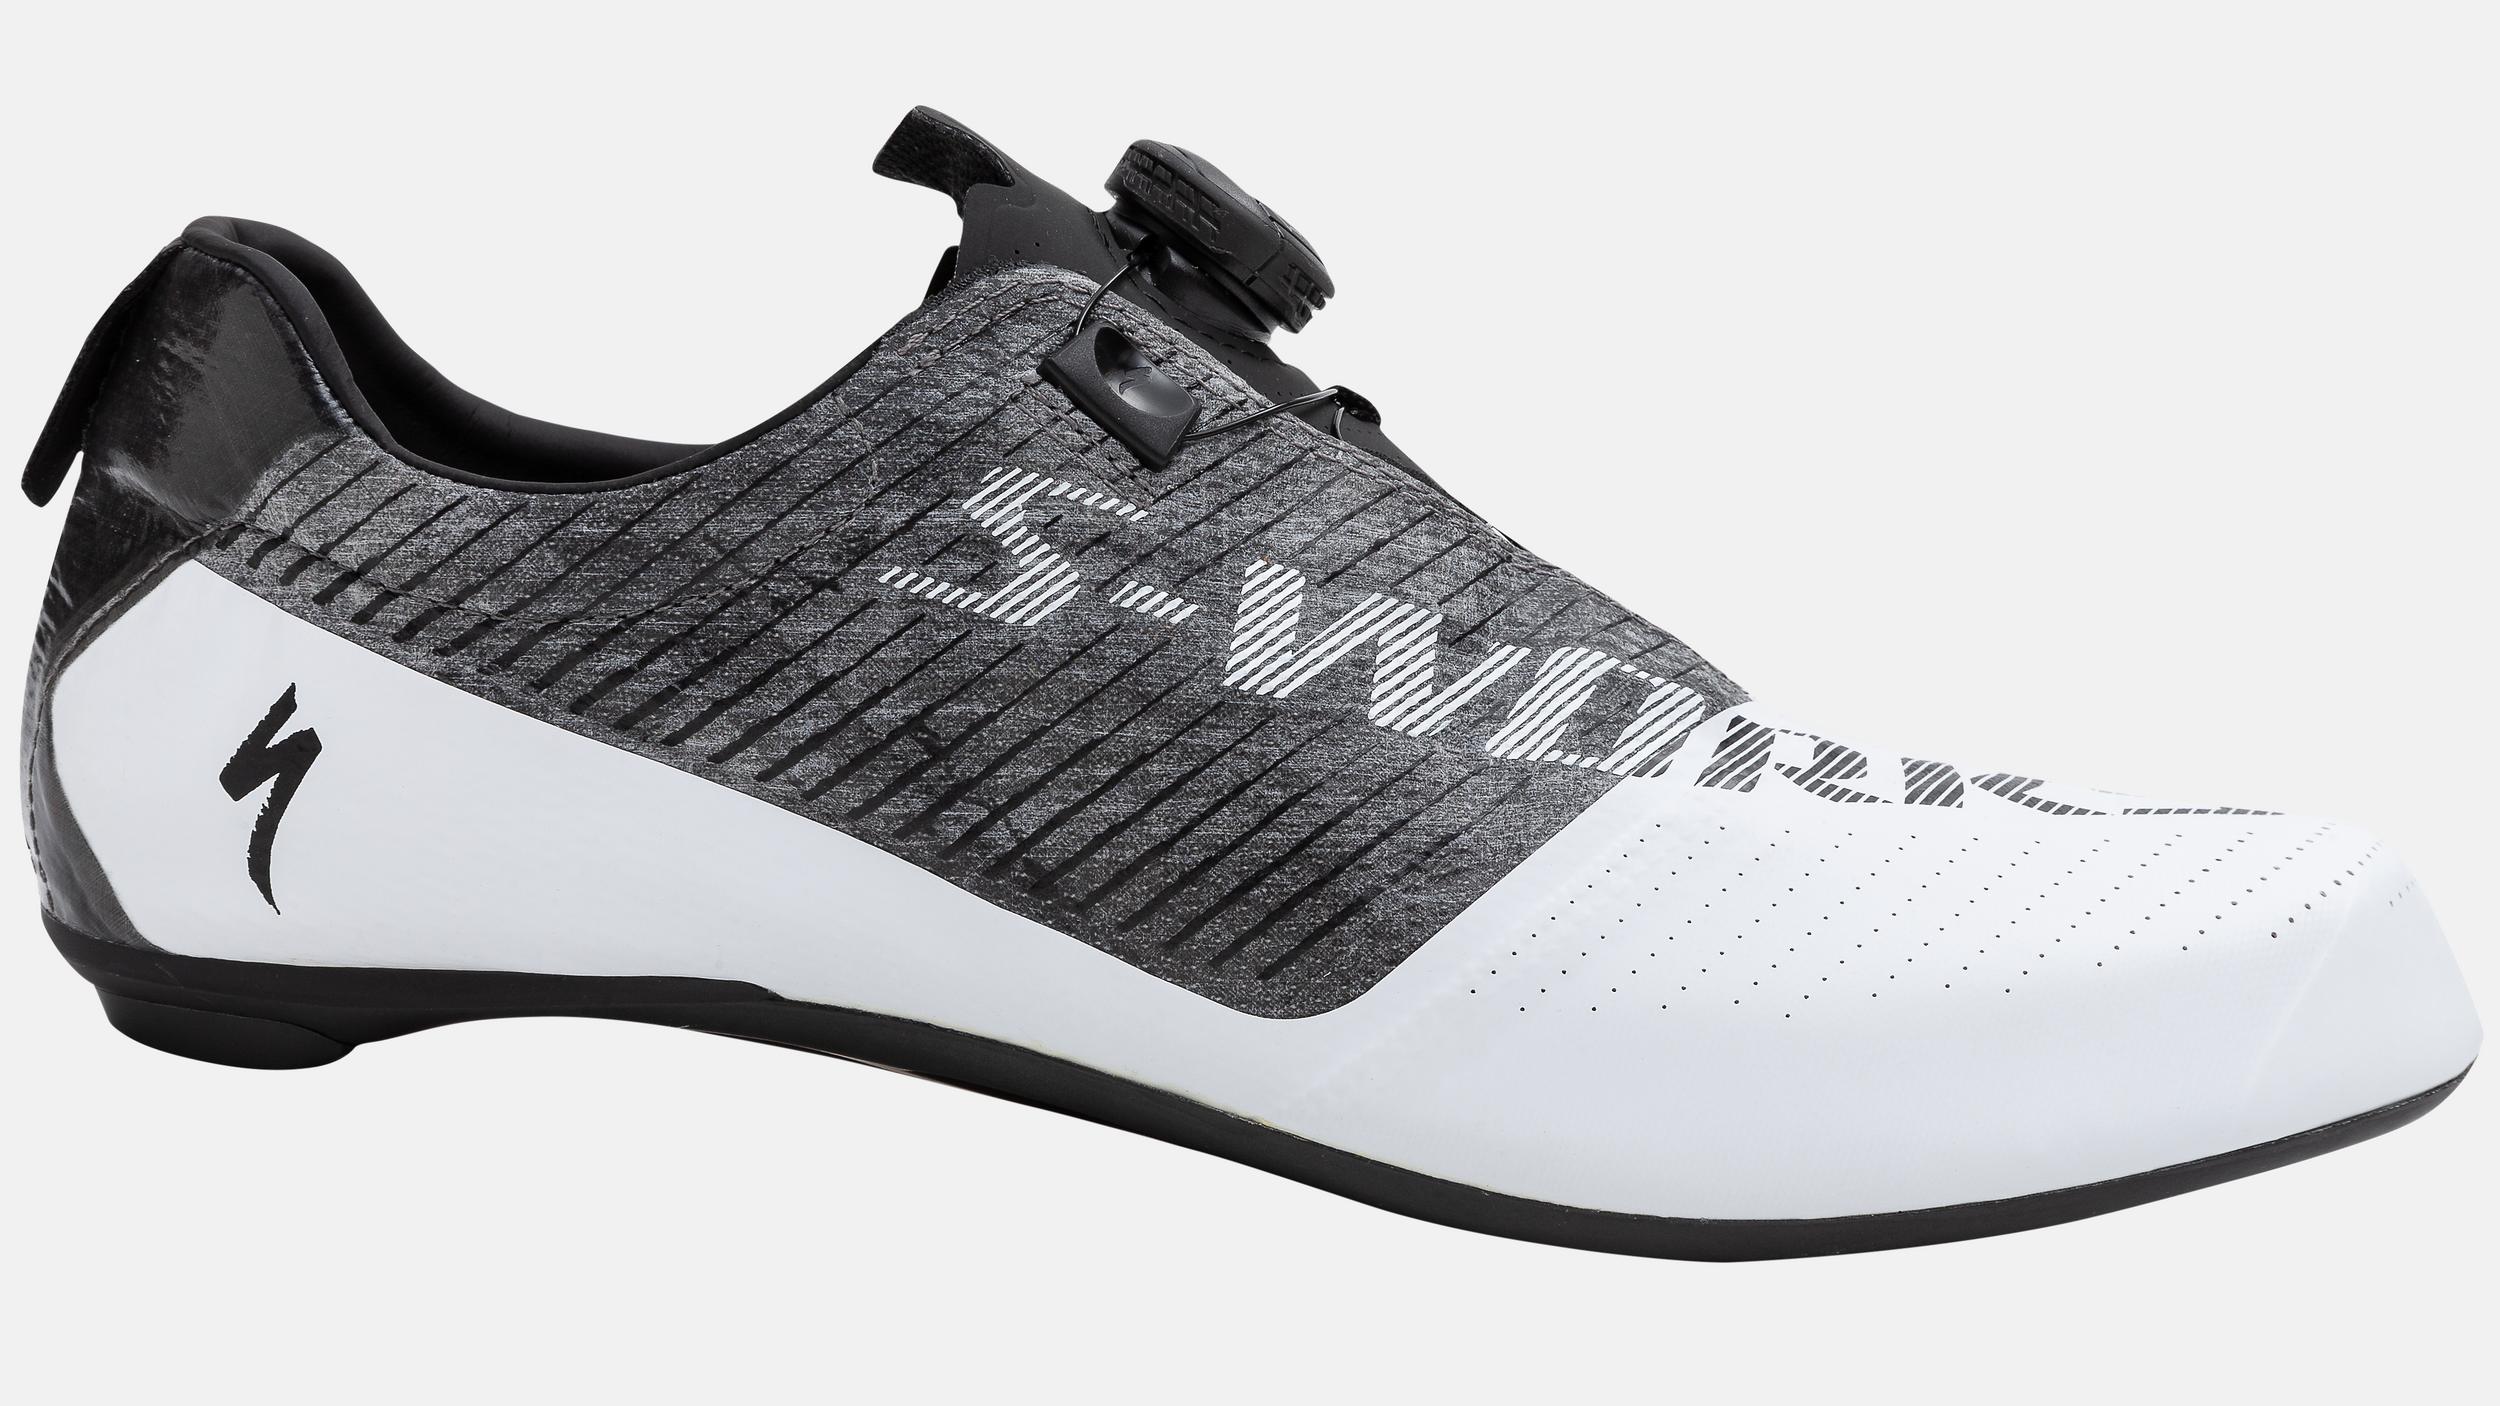 S-Works EXOS Road Shoes | Specialized.com